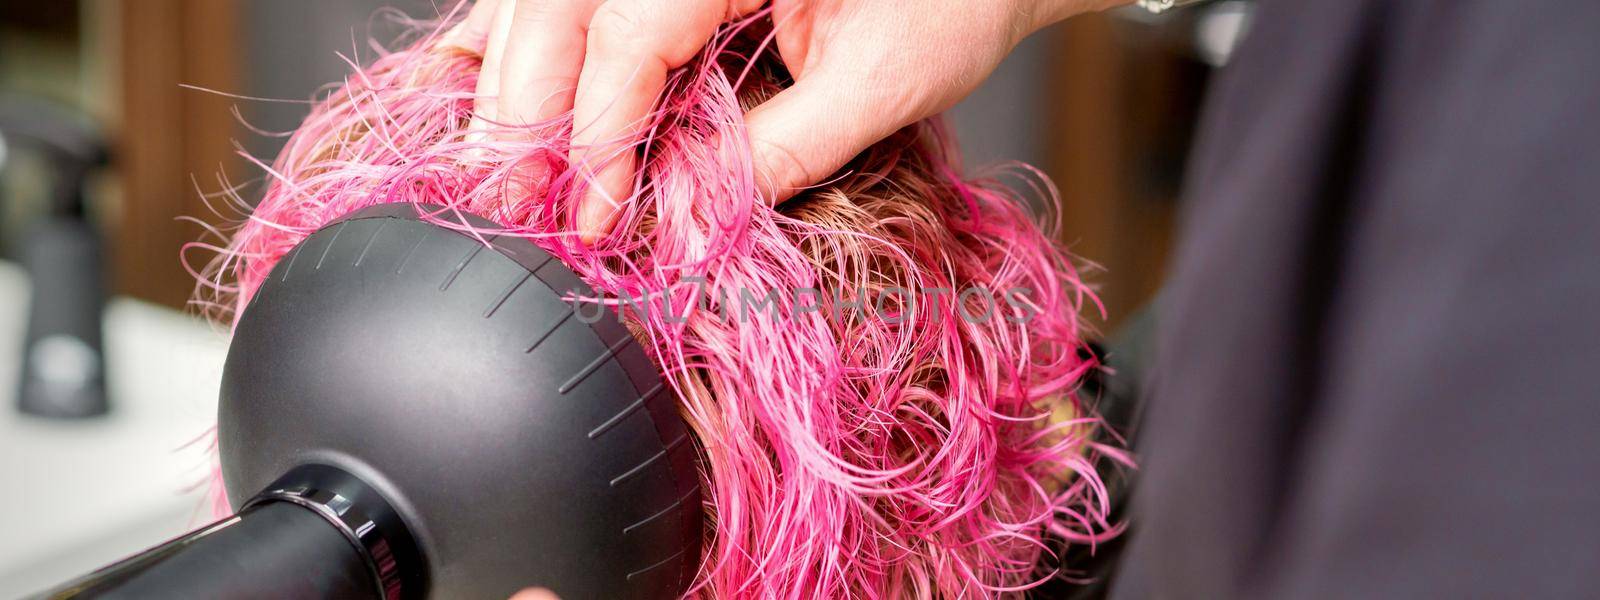 Drying short pink bob hairstyle of a young caucasian woman with a black hair dryer with the brush by hands of a male hairdresser in a hair salon, close up. by okskukuruza